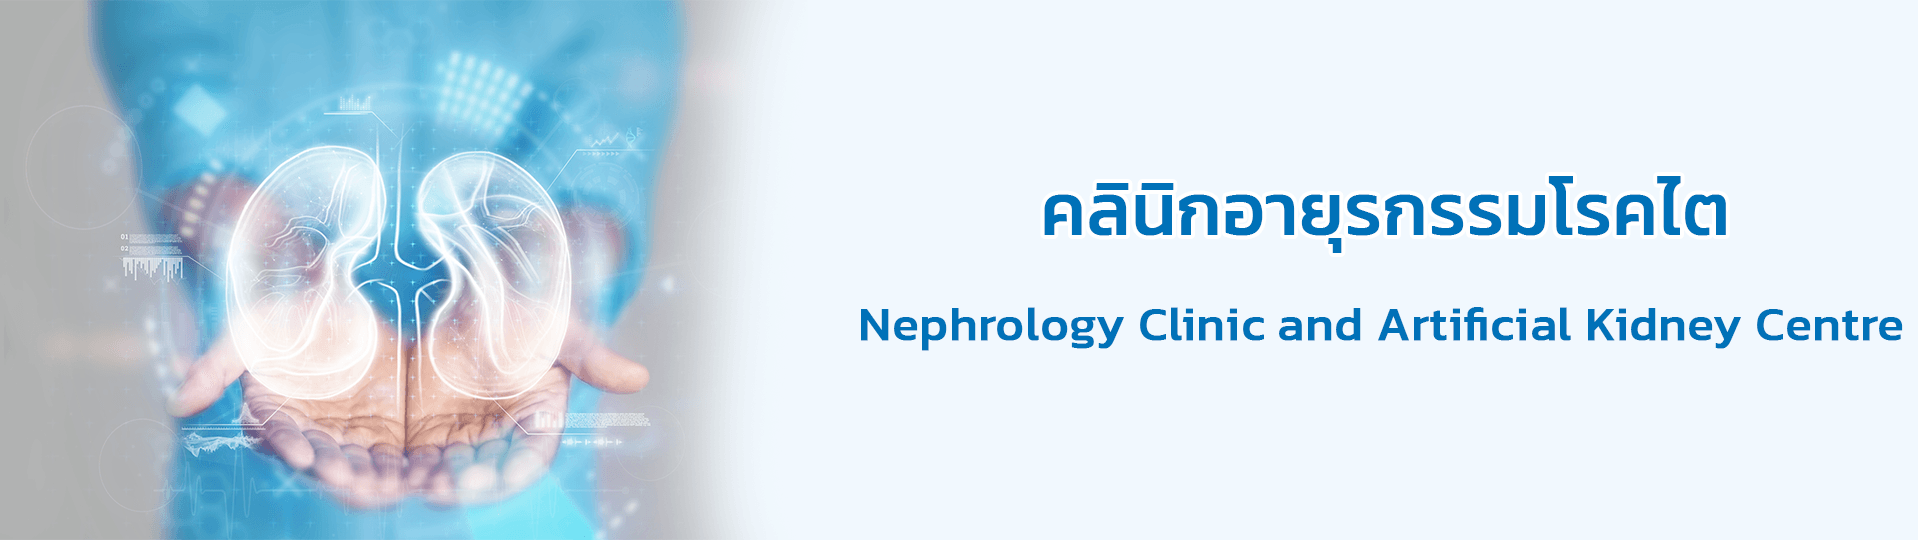 Nephrology Clinic and Artificial Kidney Centre.png